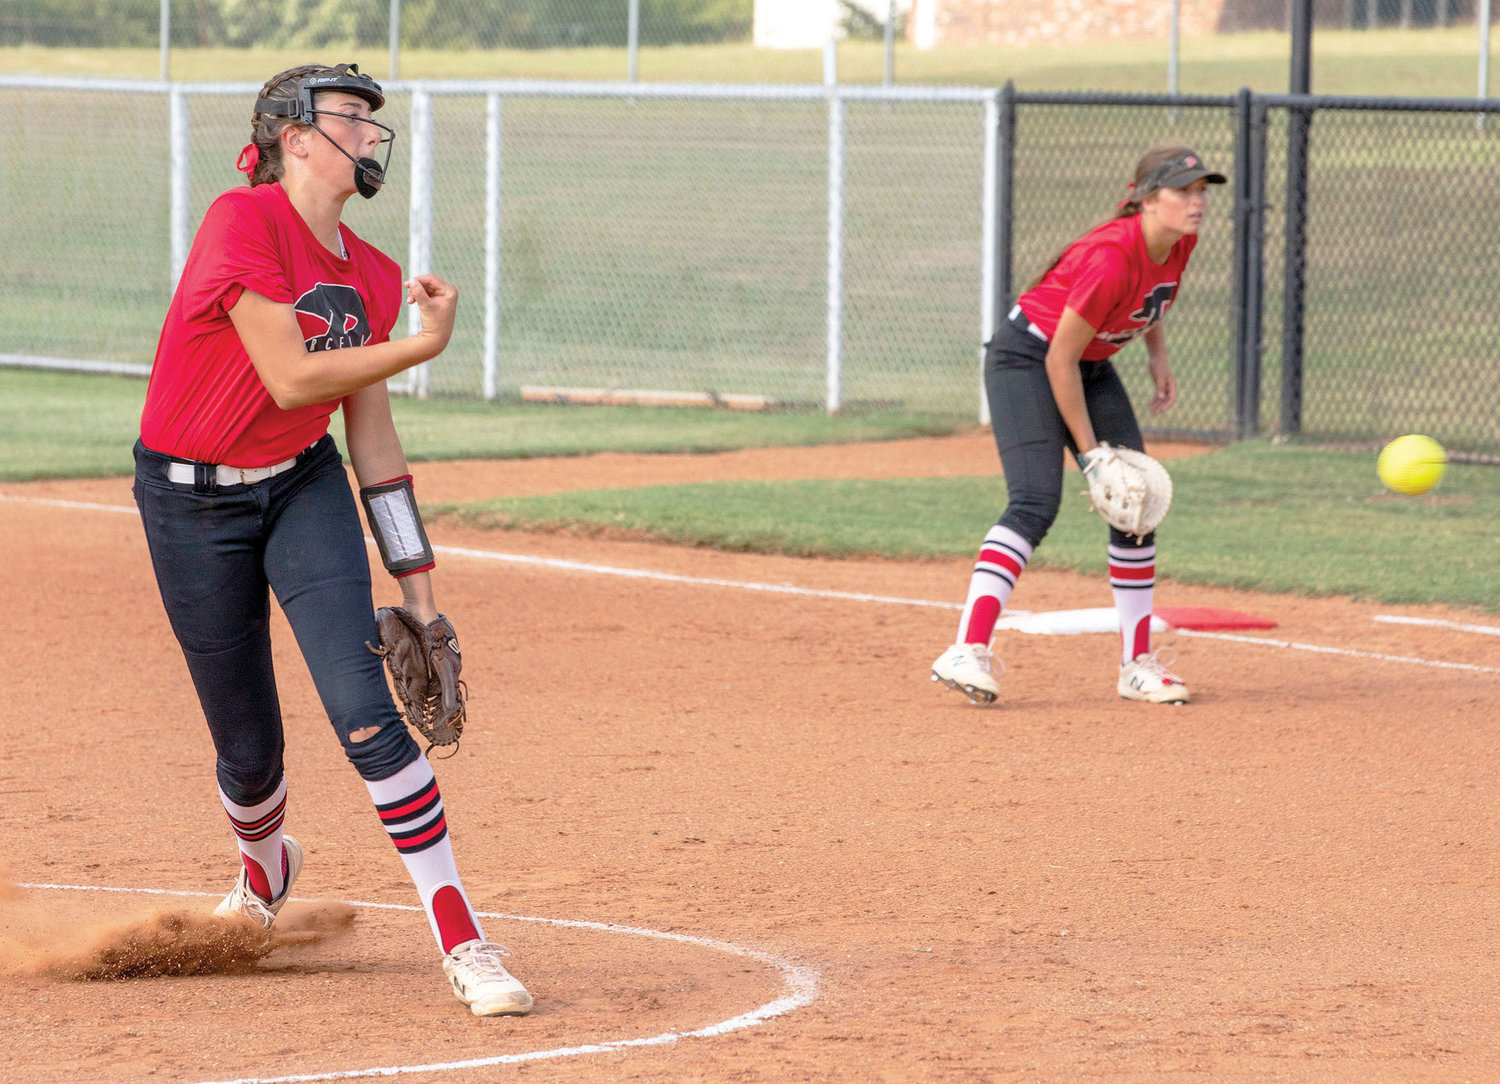 Purcell freshman Ella Resendiz sends a ball home during Purcell’s 6-5 win over Chandler. Resendiz struck out two batters in the win.